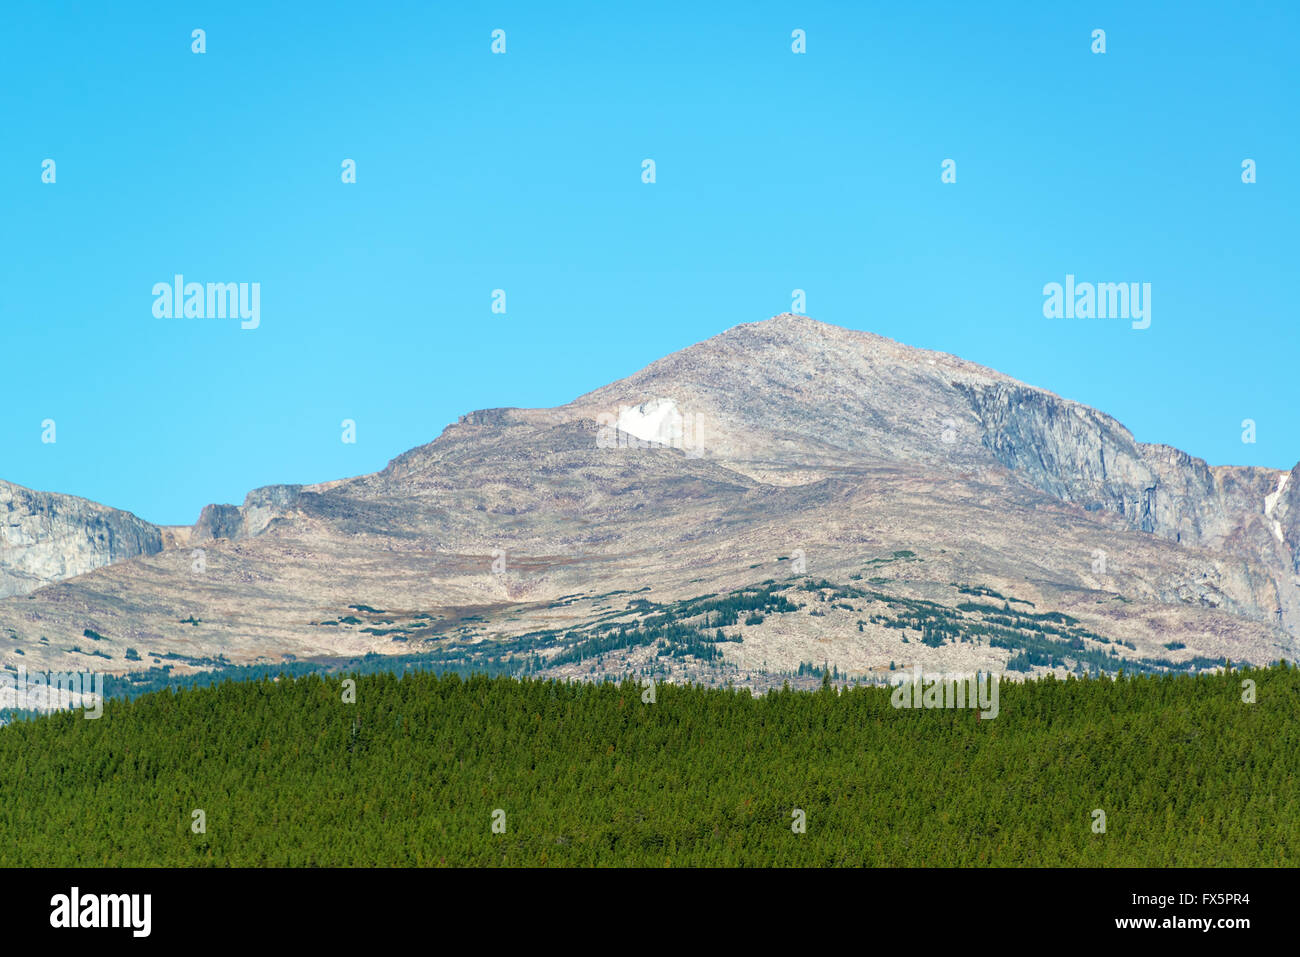 View of Darton Peak in the Bighorn National Forest in Wyoming Stock Photo